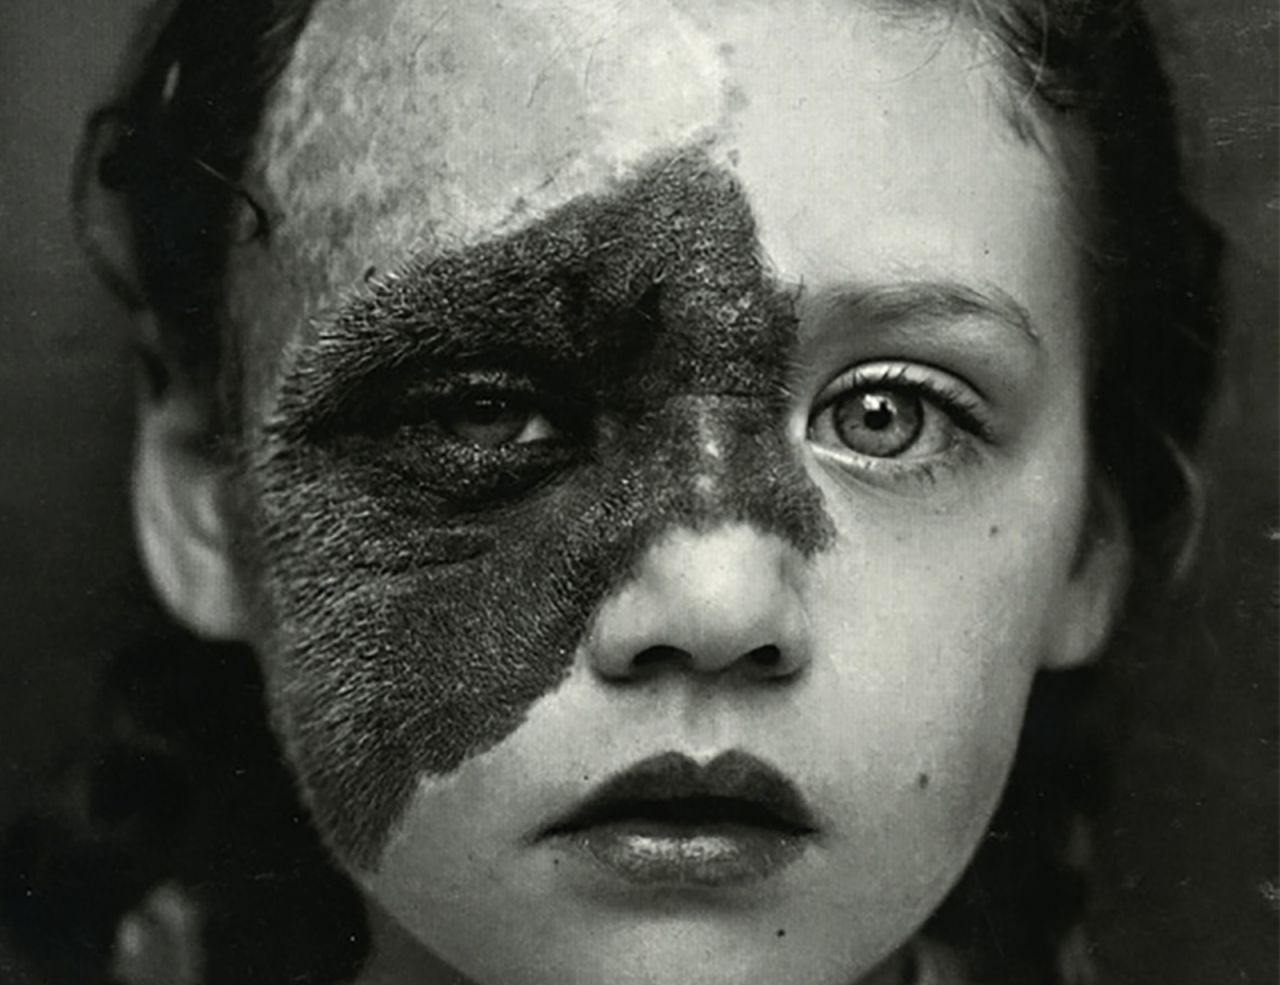 A photo of a girl with a "Utrechtse Krop" (Utretch goiter) -- a thyroid condition common in the Dutch city in the 19th century, when local drinking water was deficient in iodine.